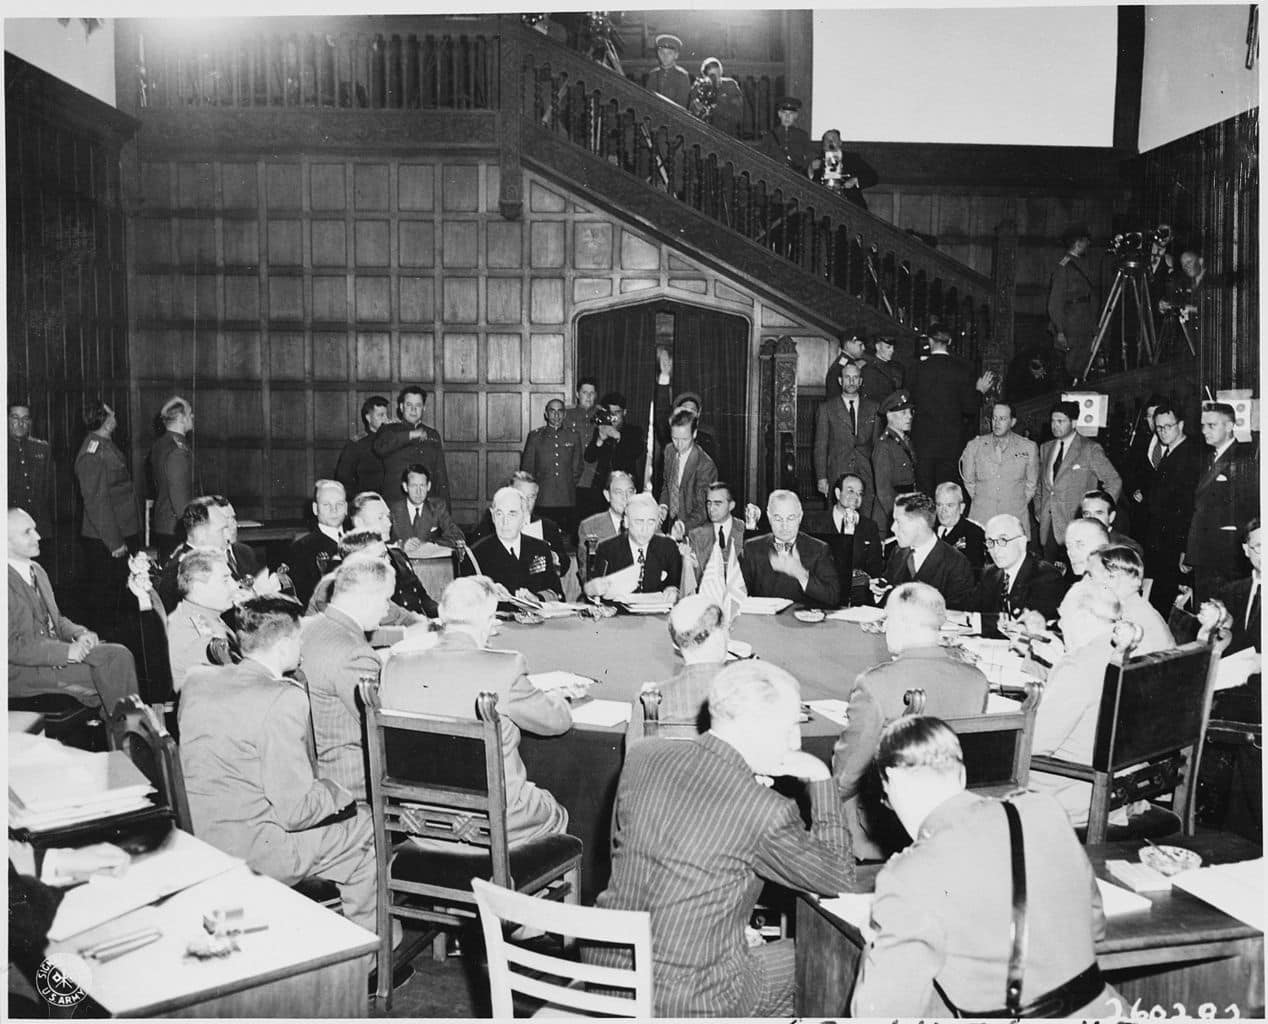 The Potsdam Conference - July 22nd 1945 - Another tense session of the Potsdam Conference would see the Big Three tackle the question of Poland again